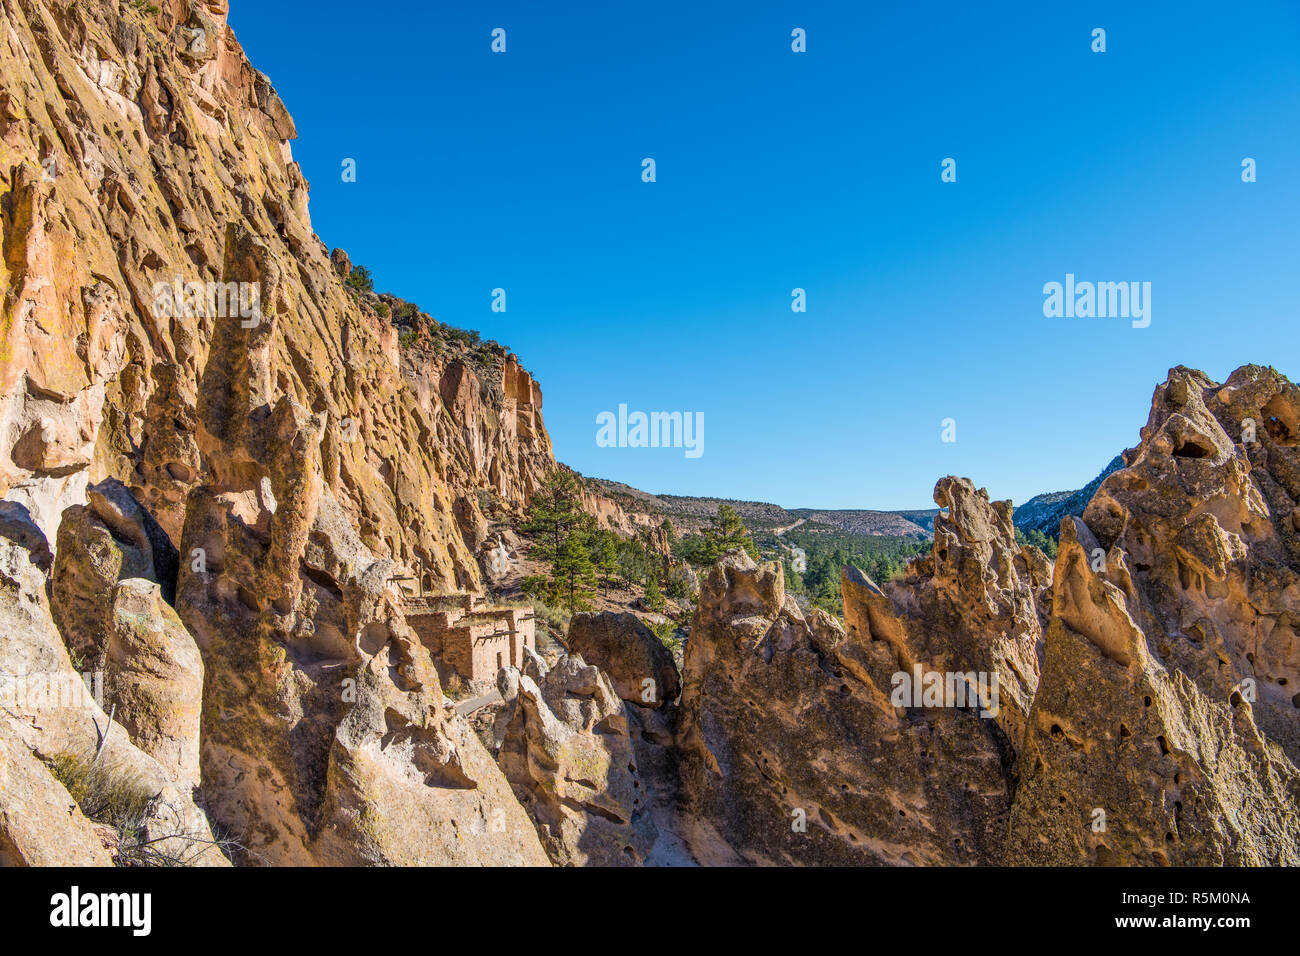 Colorful jagged rock formations, high cliffs, and ancient adobe ruins in Bandelier National Monument near Santa Fe, New Mexico Stock Photo